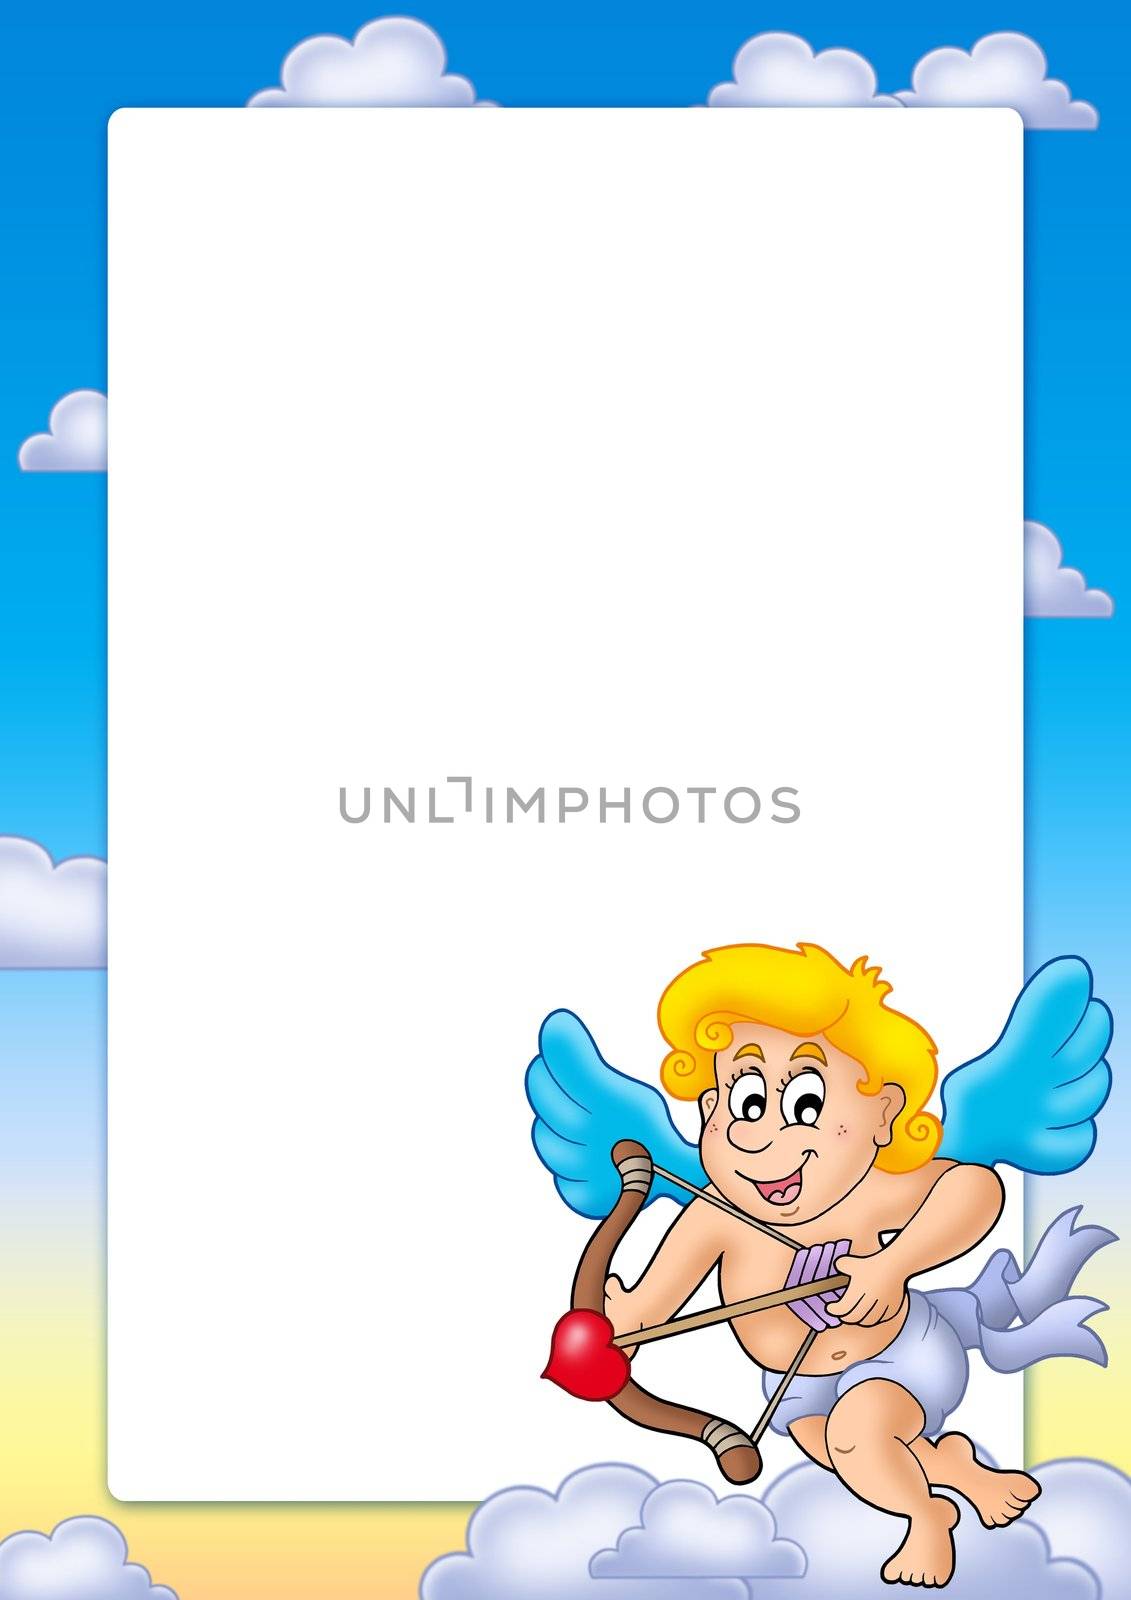 Valentine frame with happy Cupid 2 - color illustration.